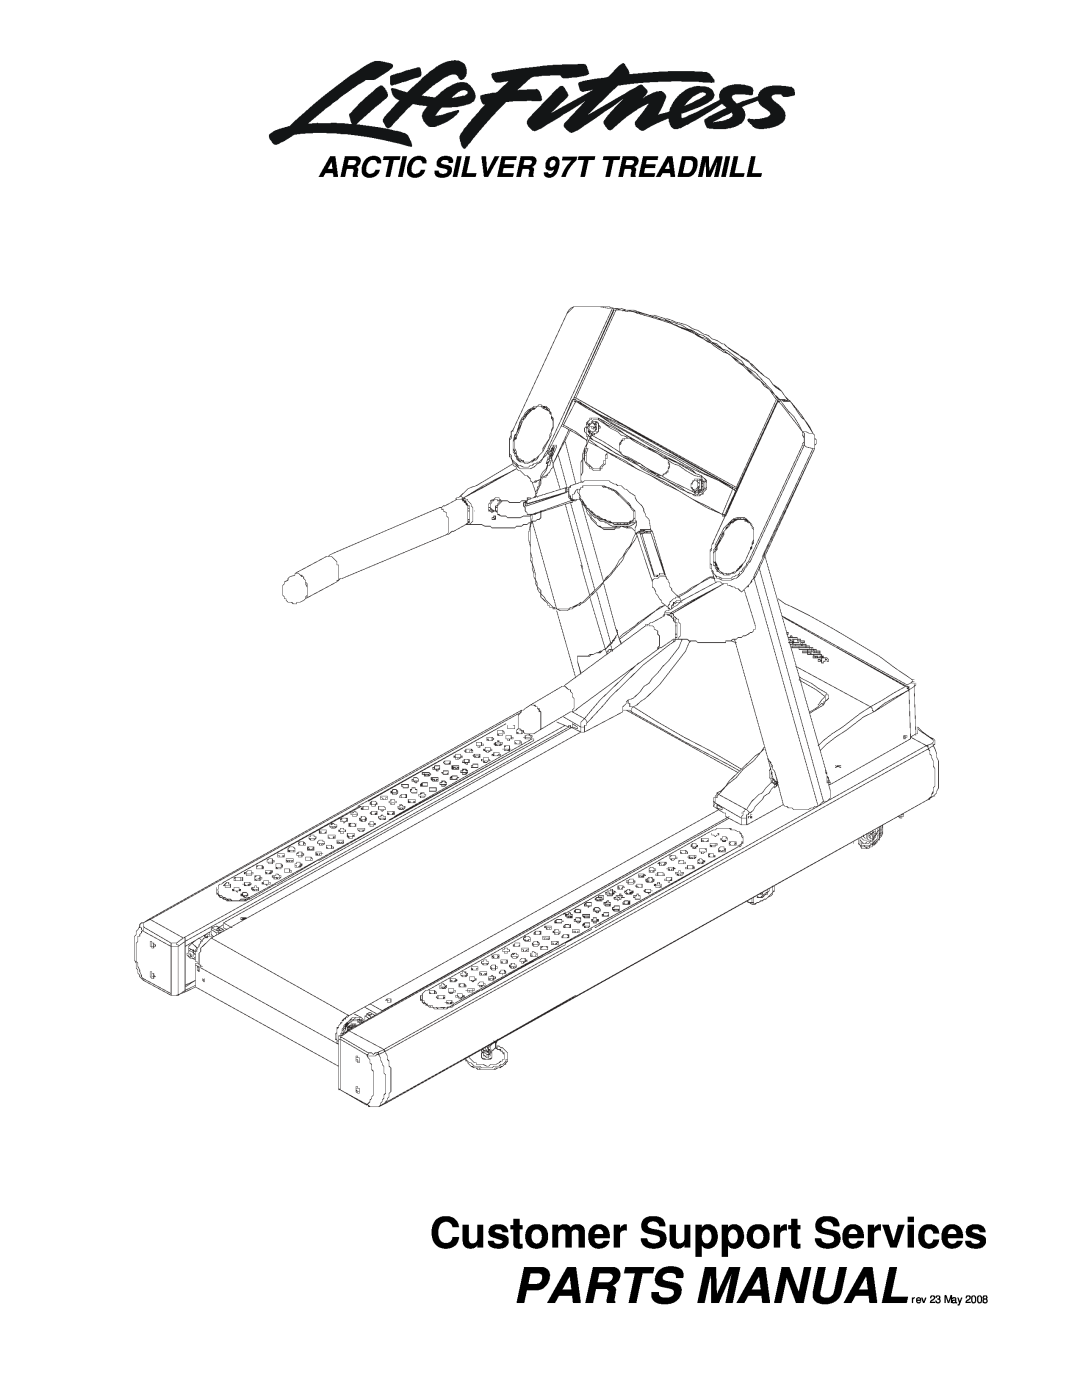 Life Fitness manual Customer Support Services, ARCTIC SILVER 97T TREADMILL, PARTS MANUALrev 23 May 